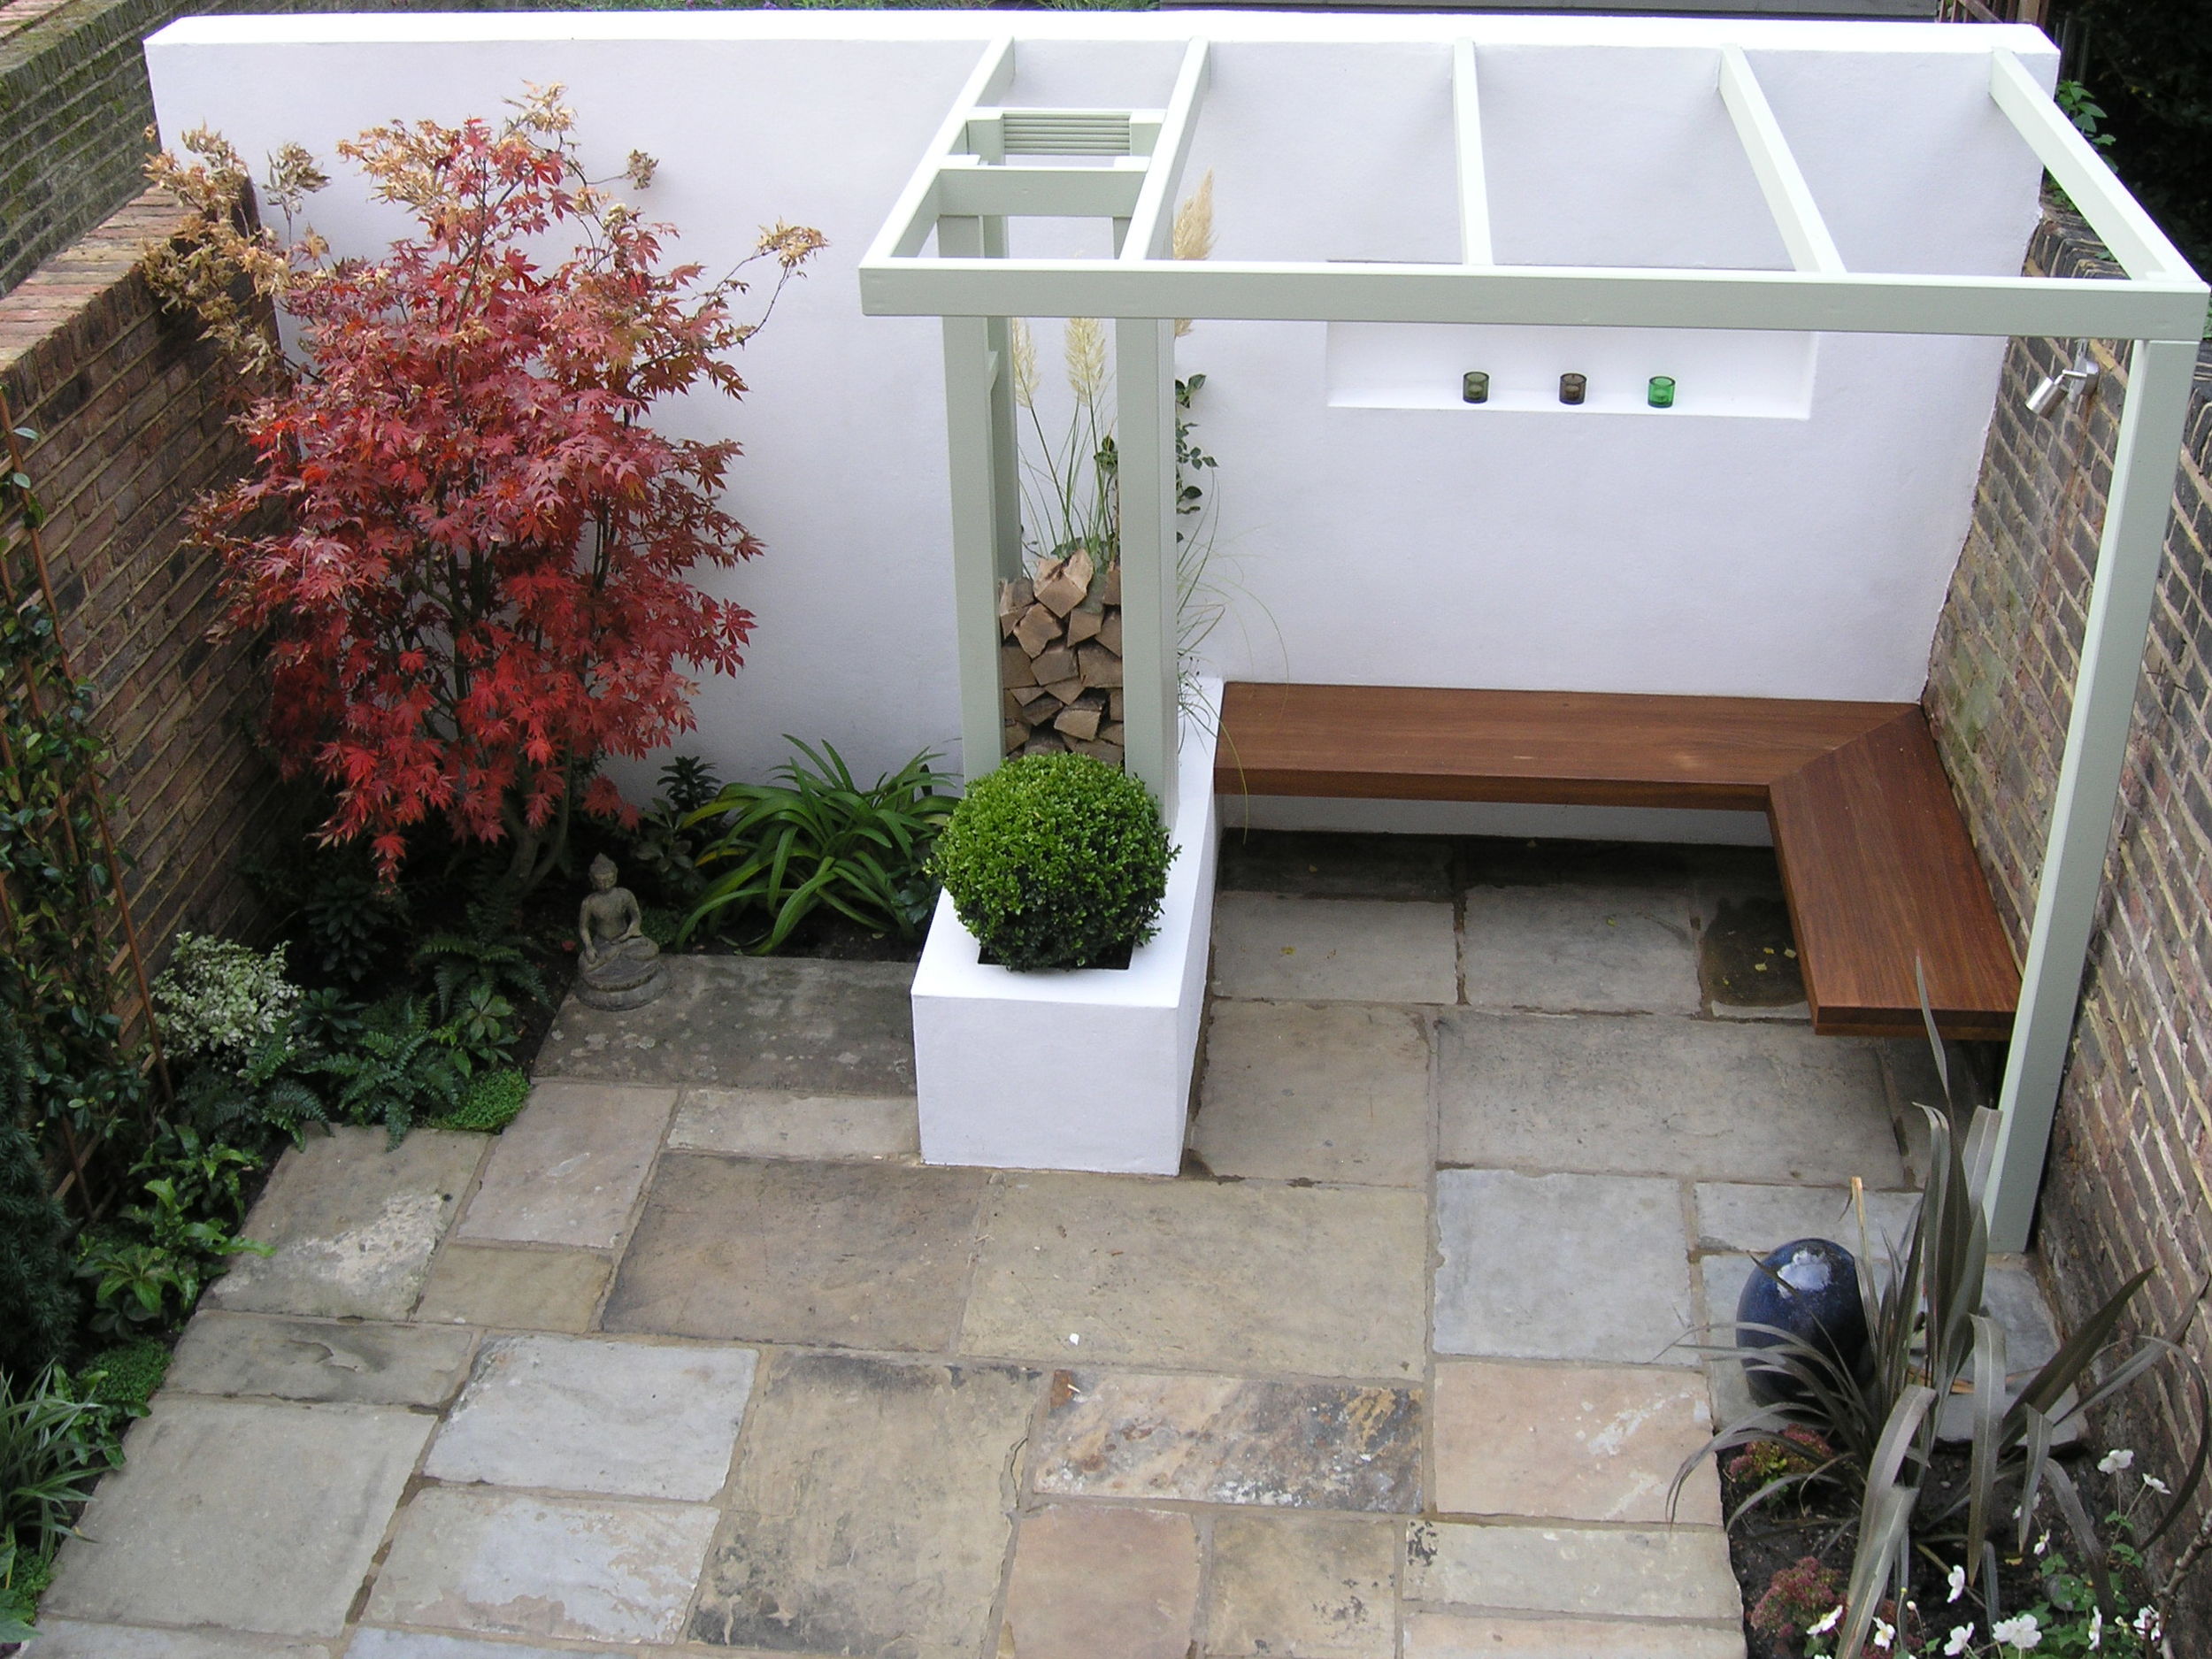 North London rear garden with Yorkstone patio and bespoke furniture